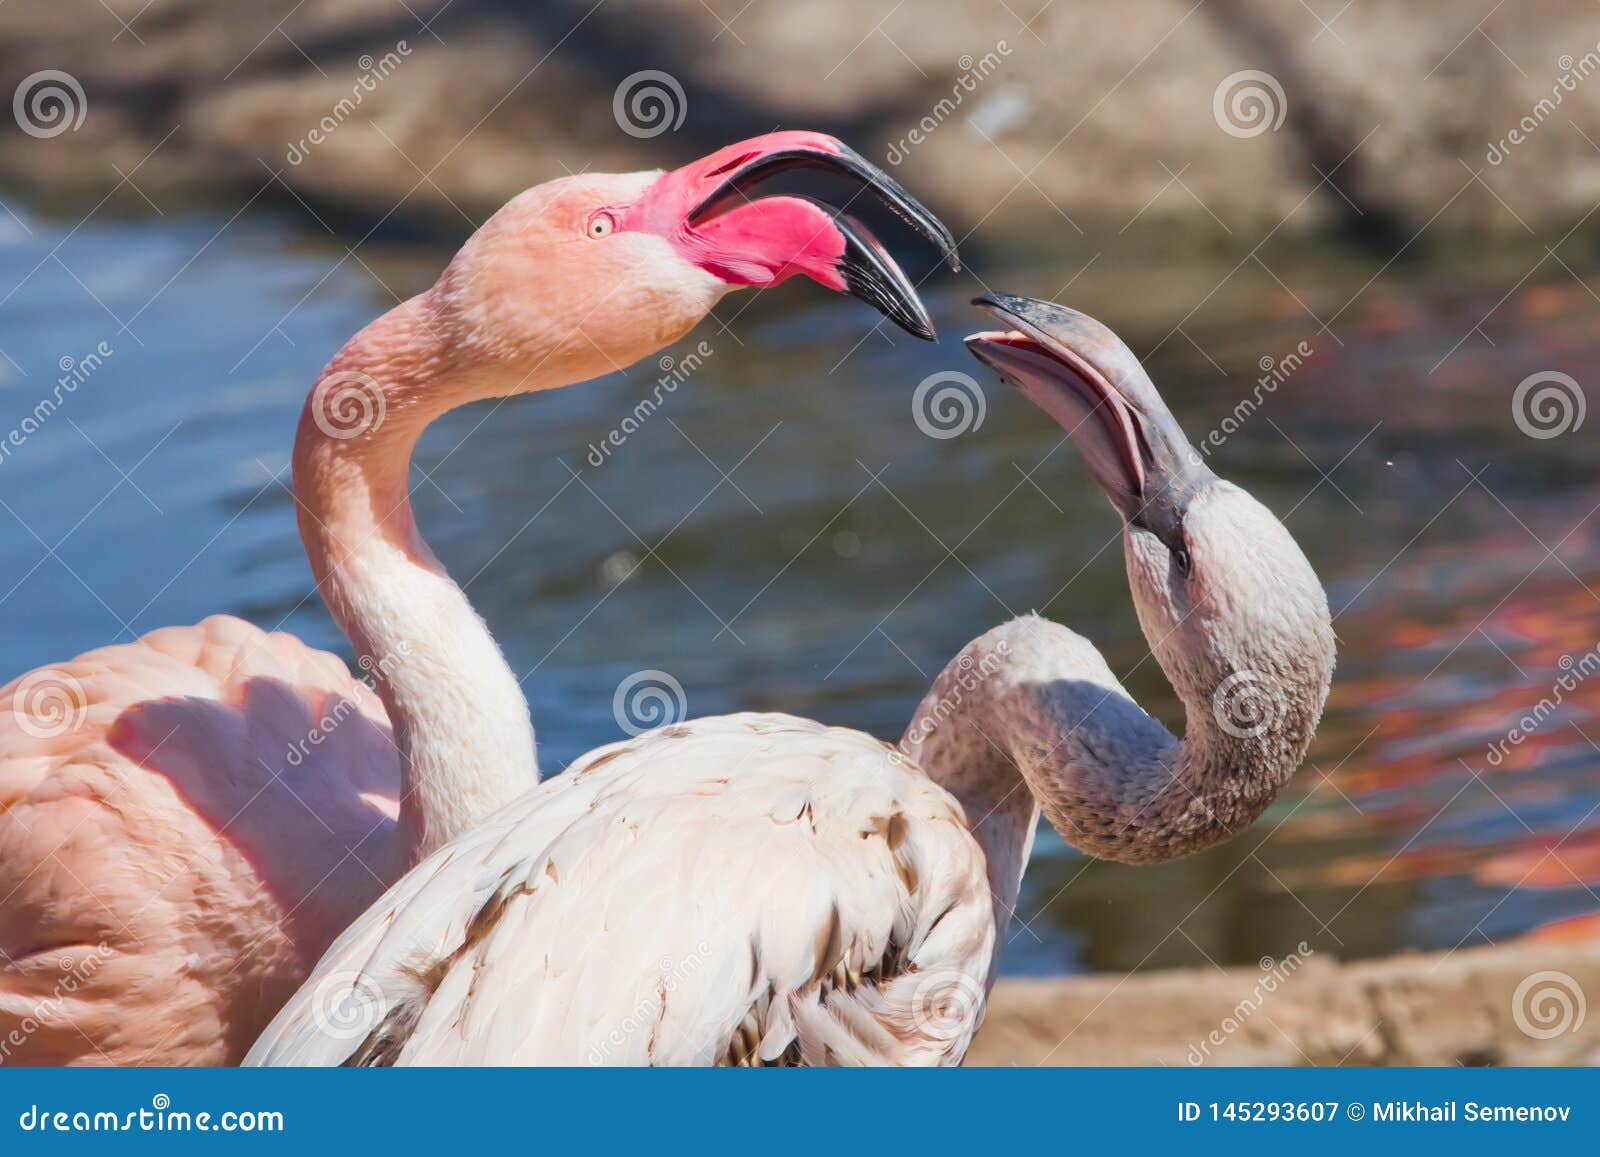 Marital Games Or Fight Of White And Pink Glamorous Flamingos Long Necks Stock Image Image Of